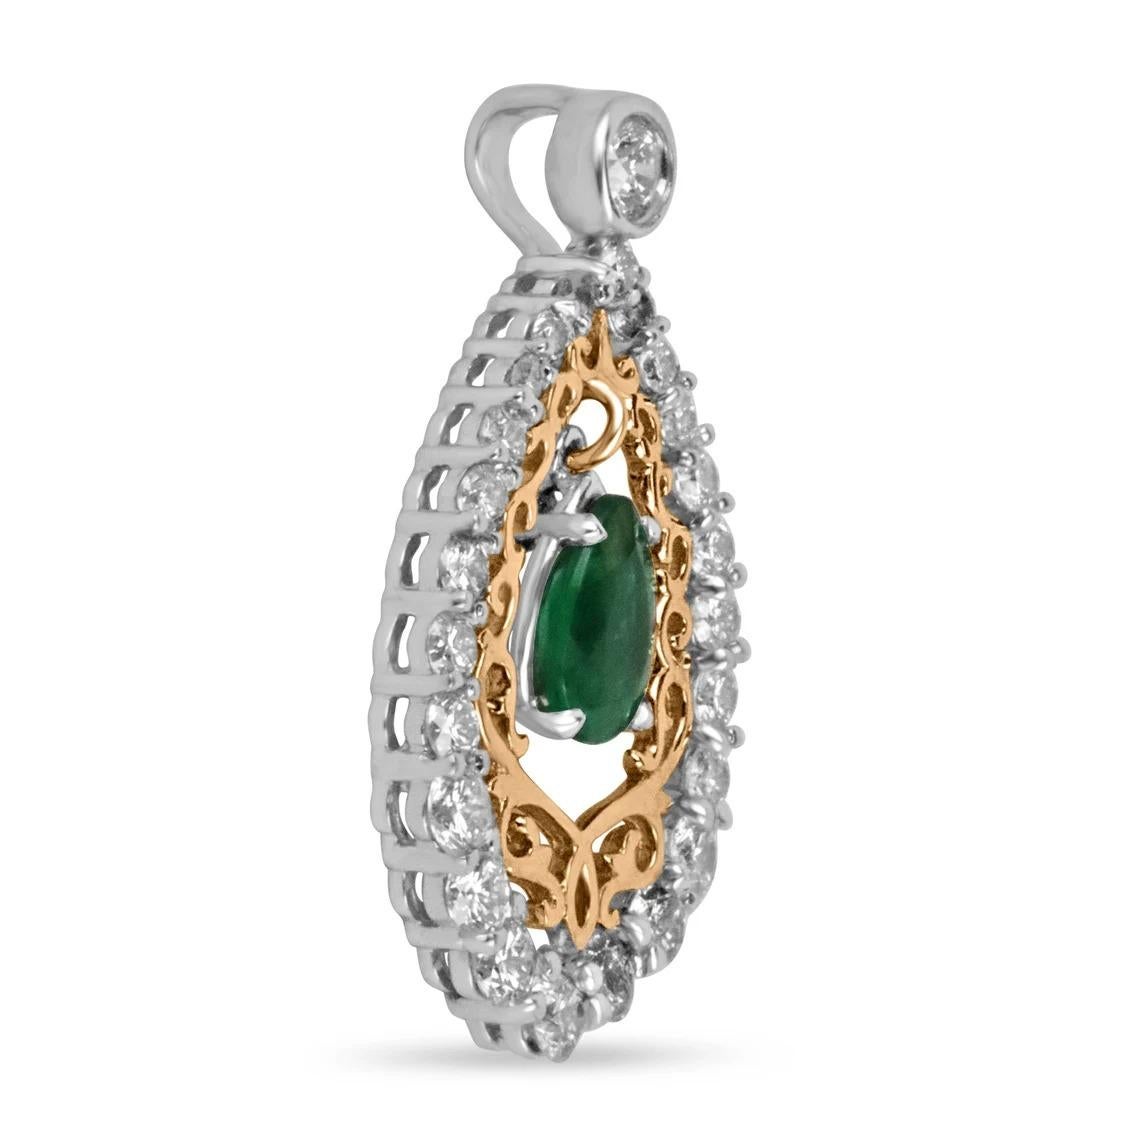 A spectacular 1.43tcw emerald and diamond halo pendant. Crafted in two-toned gold. The center gemstone is floating among stunning diamonds. The earth-mined emerald is handset in a secure four-prong setting. This gem has deep green color and is eye